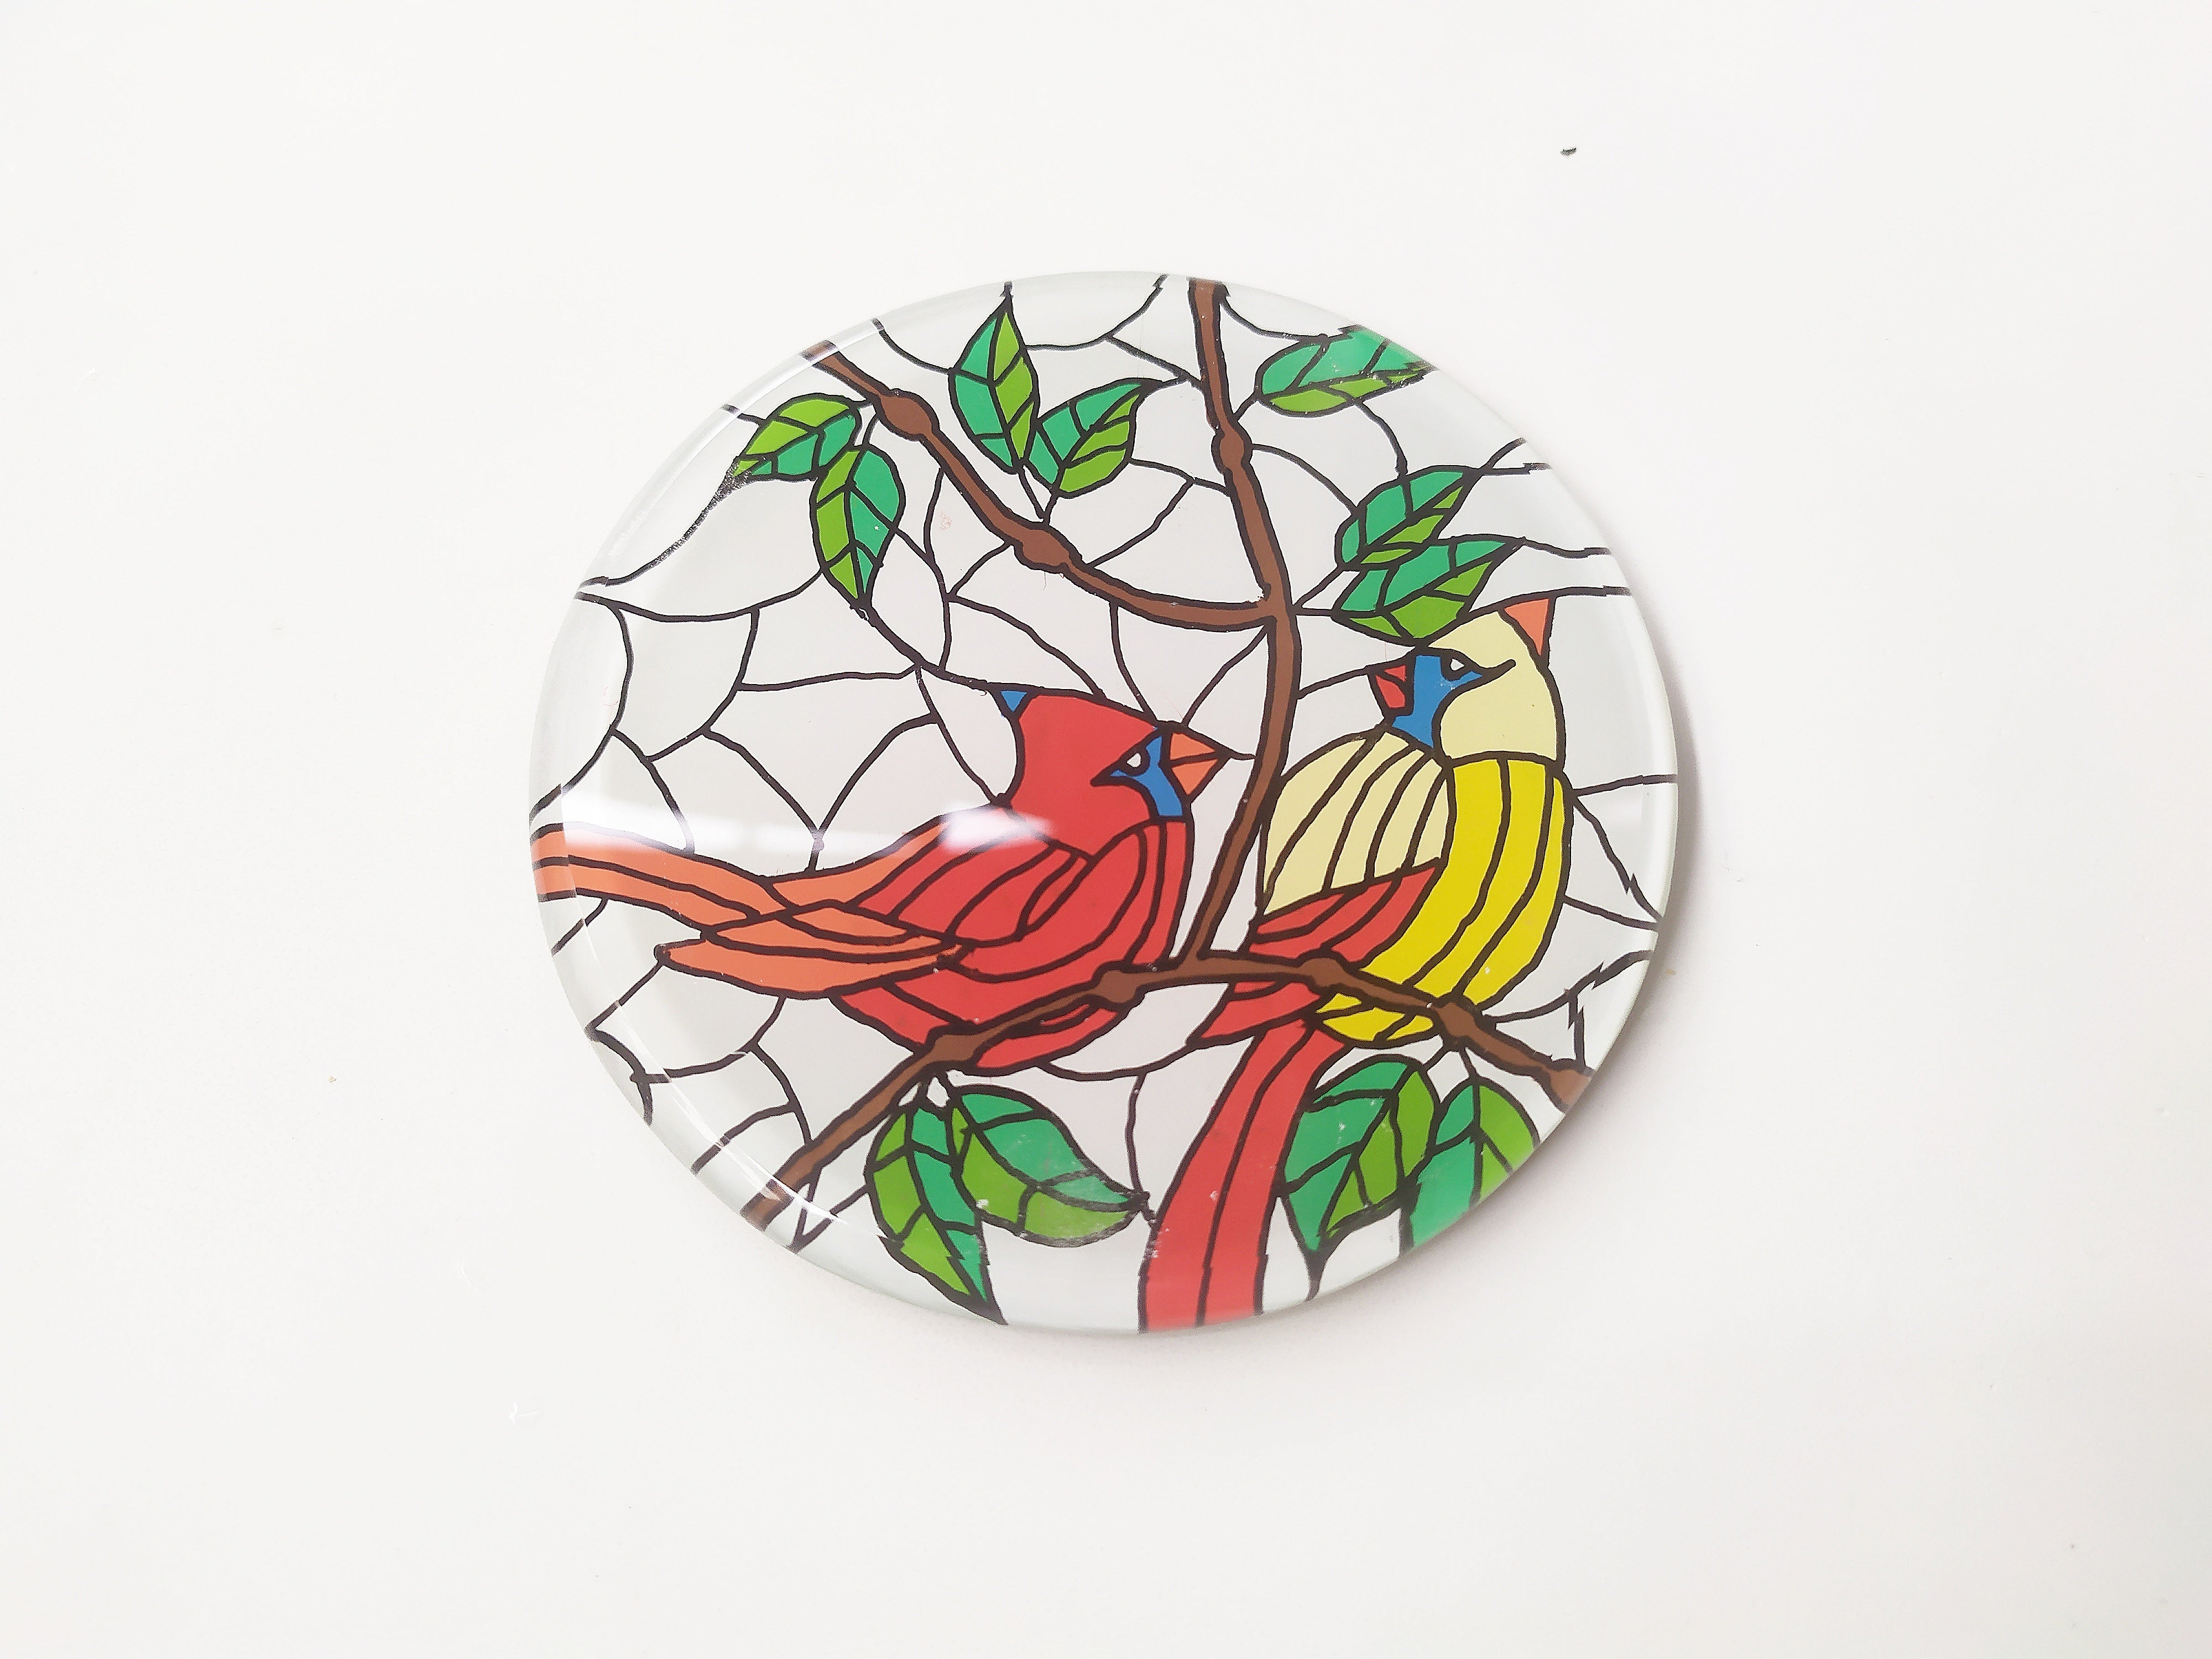 Mirror and glass hand painted bird coaster